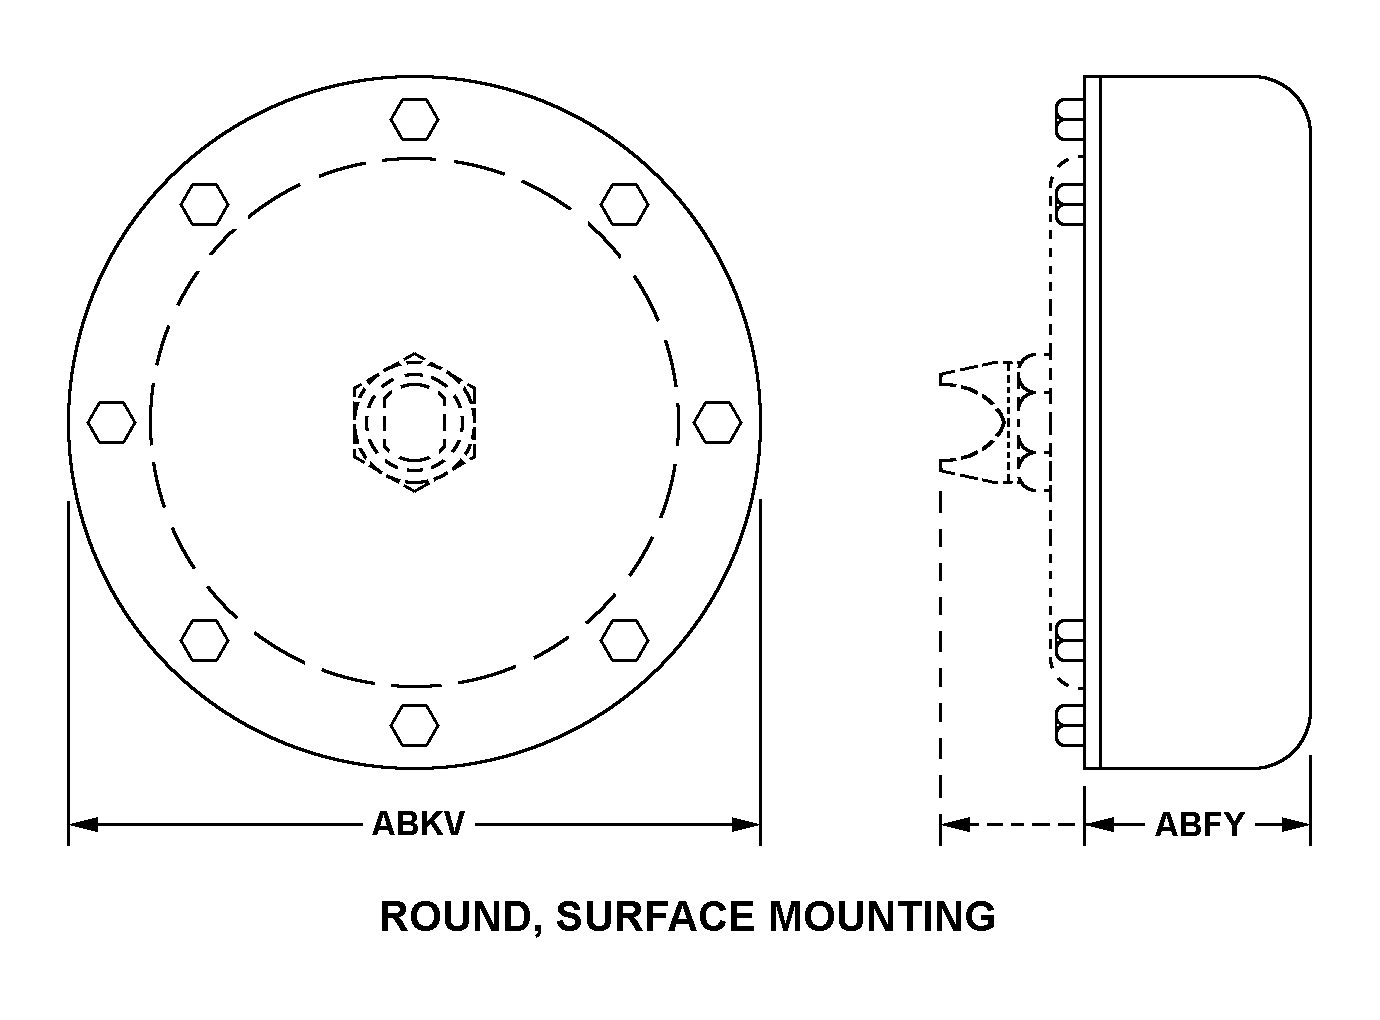 ROUND, SURFACE MOUNTING style nsn 6110-01-169-5164